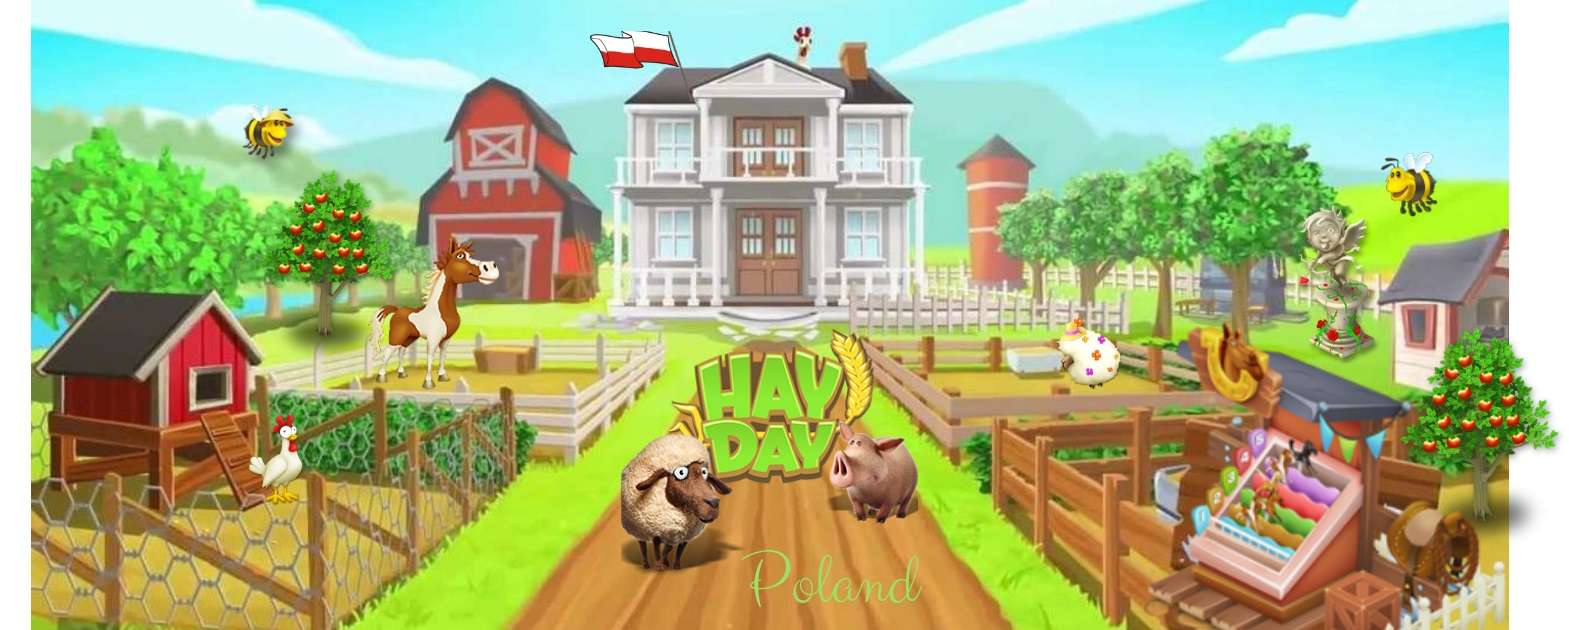 Hay Day Polonia puzzle online